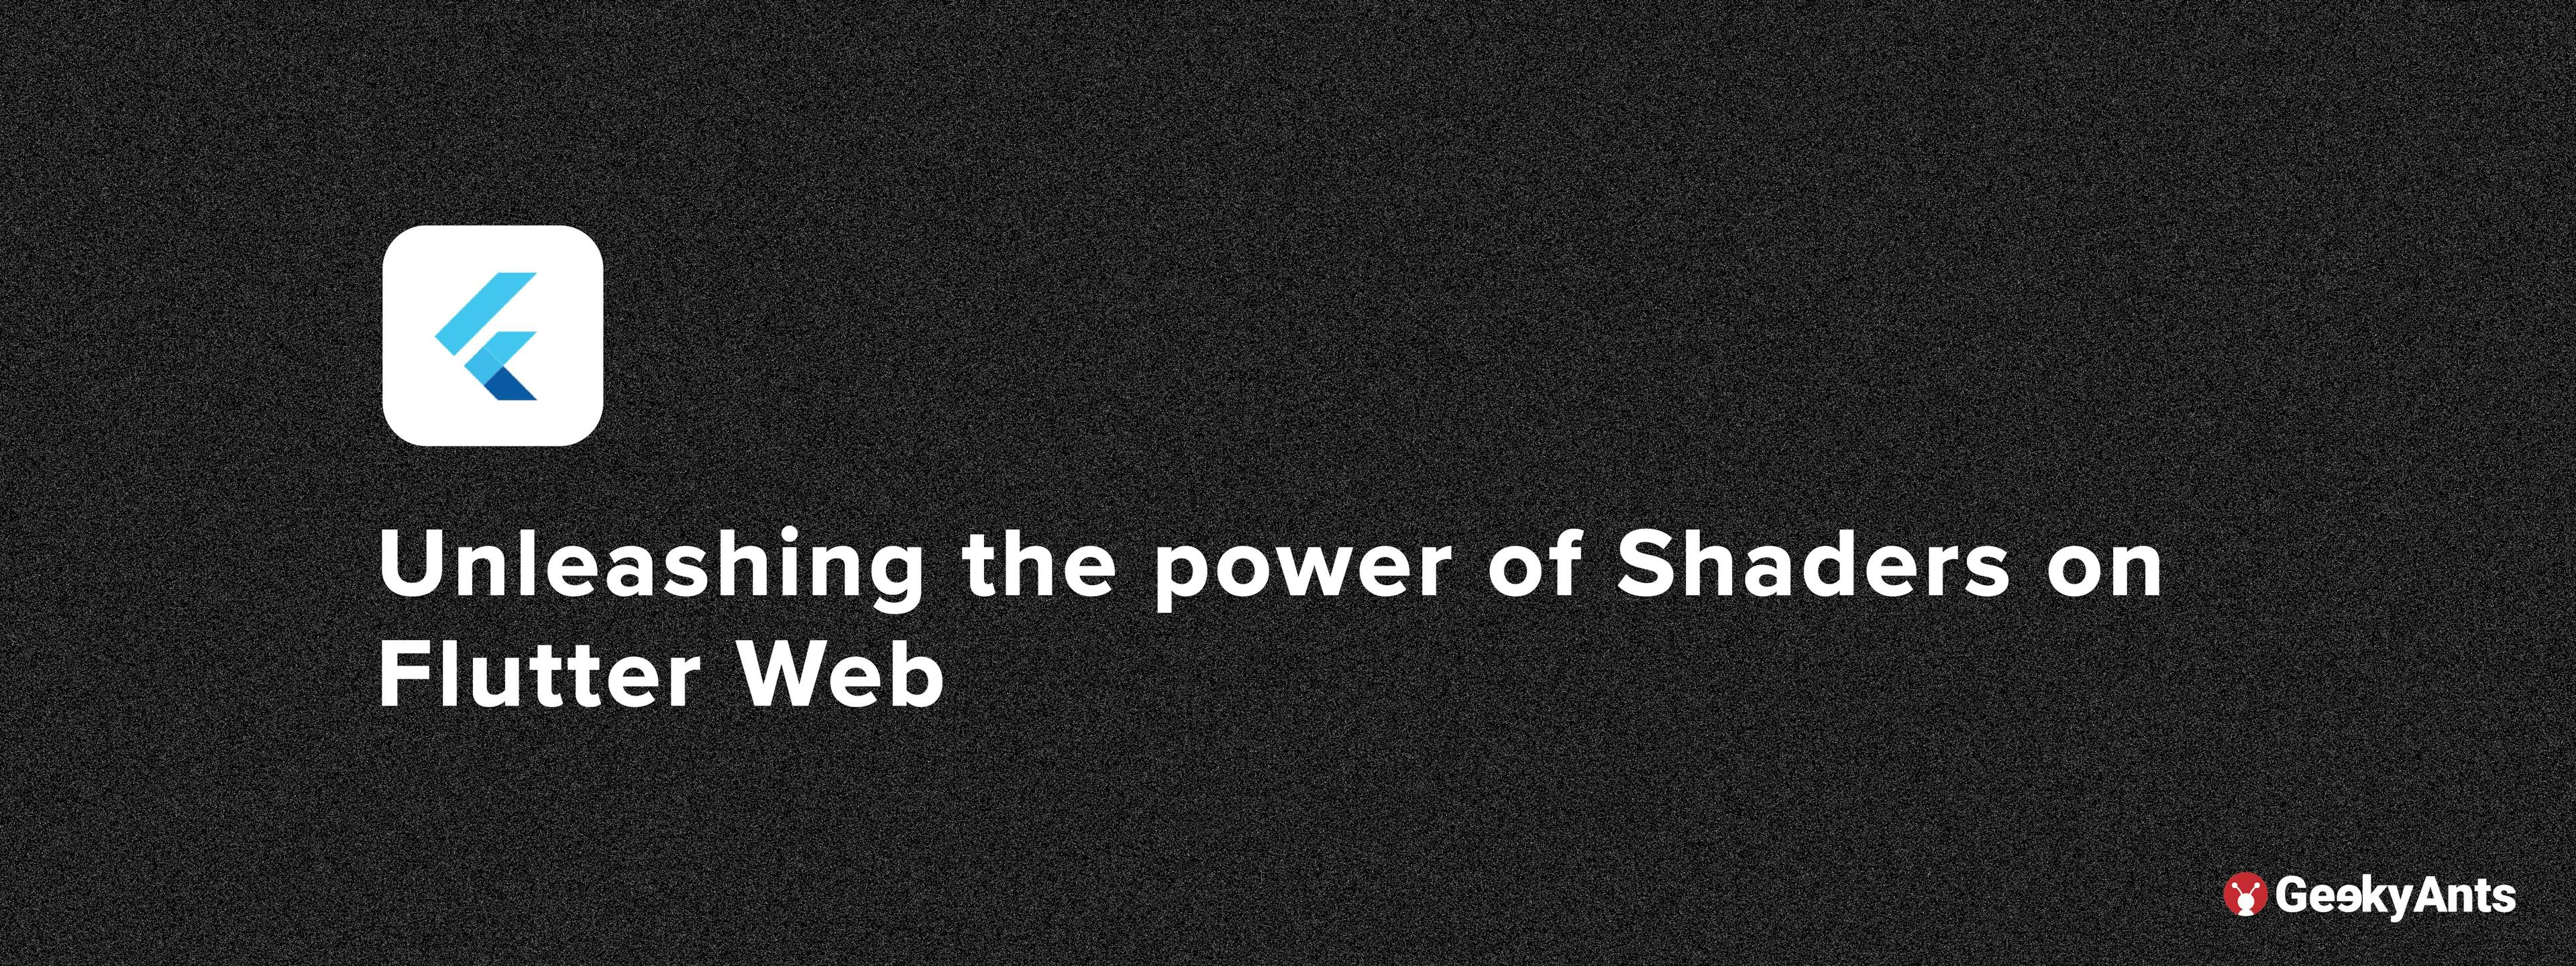 Unleashing the Power of Shaders on Flutter Web